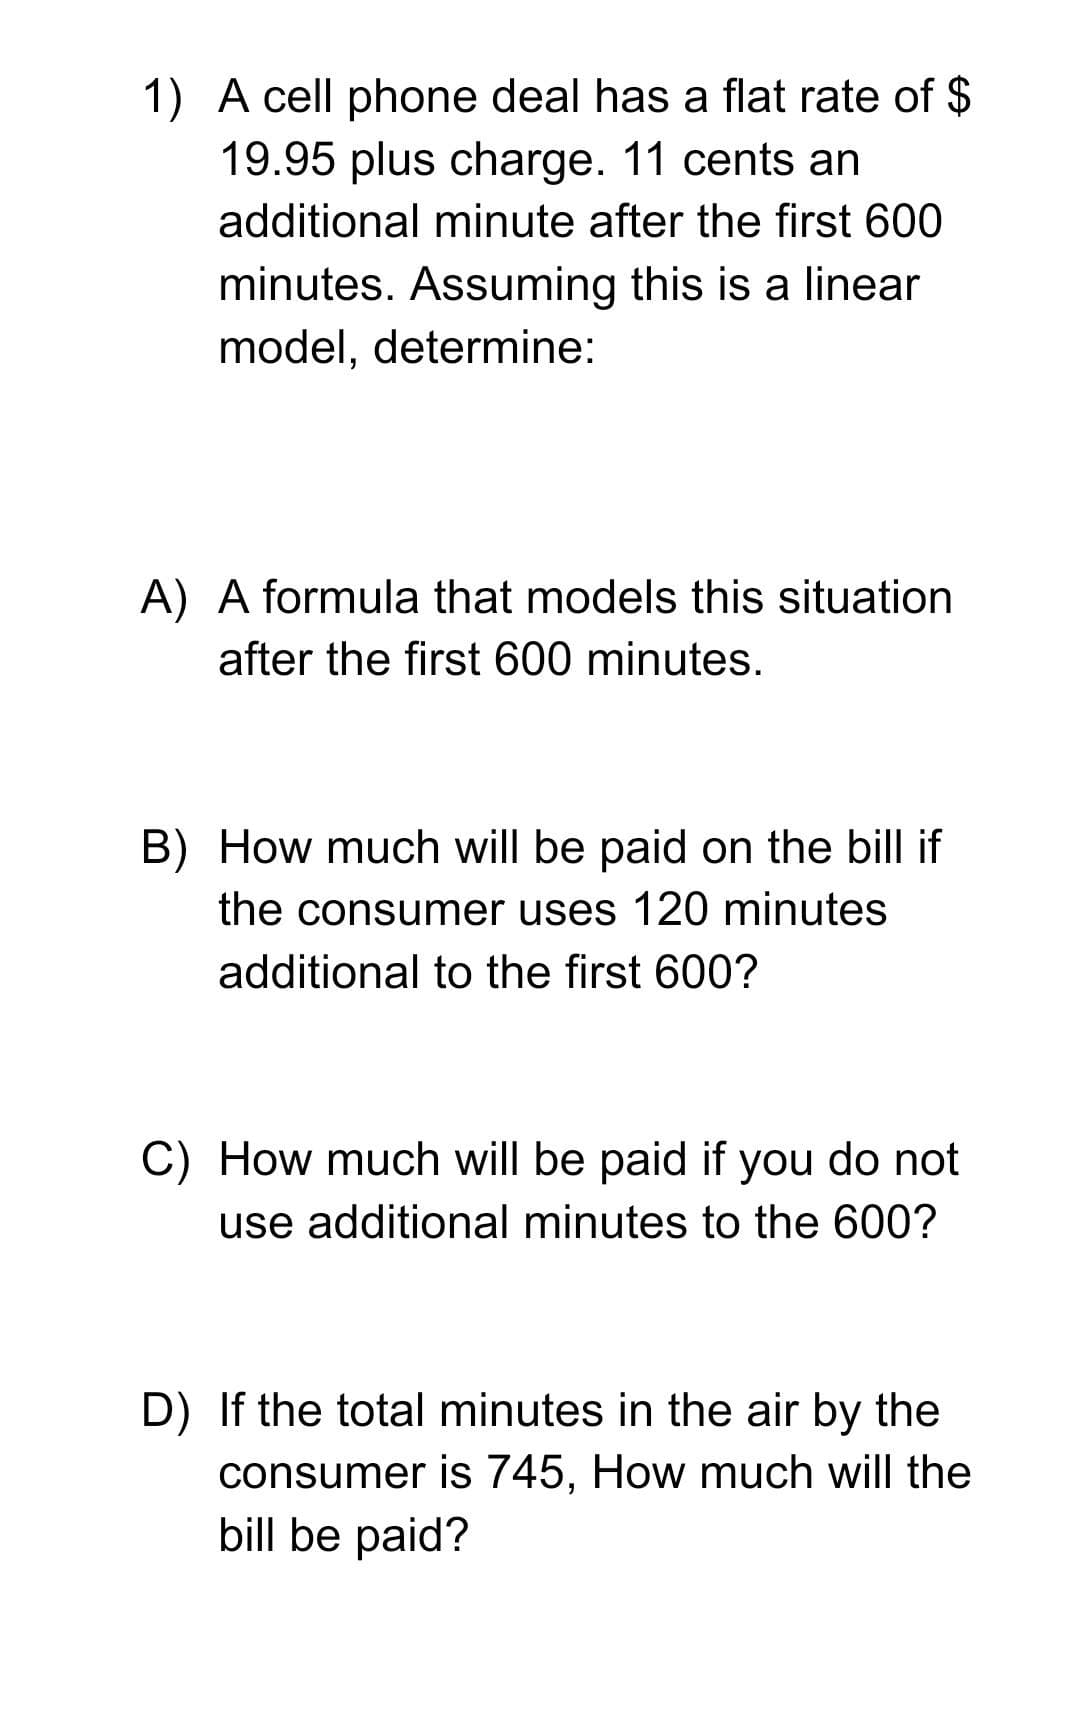 1) A cell phone deal has a flat rate of $
19.95 plus charge. 11 cents an
additional minute after the first 600
minutes. Assuming this is a linear
model, determine:
A) A formula that models this situation
after the first 600 minutes.
B) How much will be paid on the bill if
the consumer uses 120 minutes
additional to the first 600?
C) How much will be paid if you do not
use additional minutes to the 600?
D) If the total minutes in the air by the
consumer is 745, How much will the
bill be paid?
